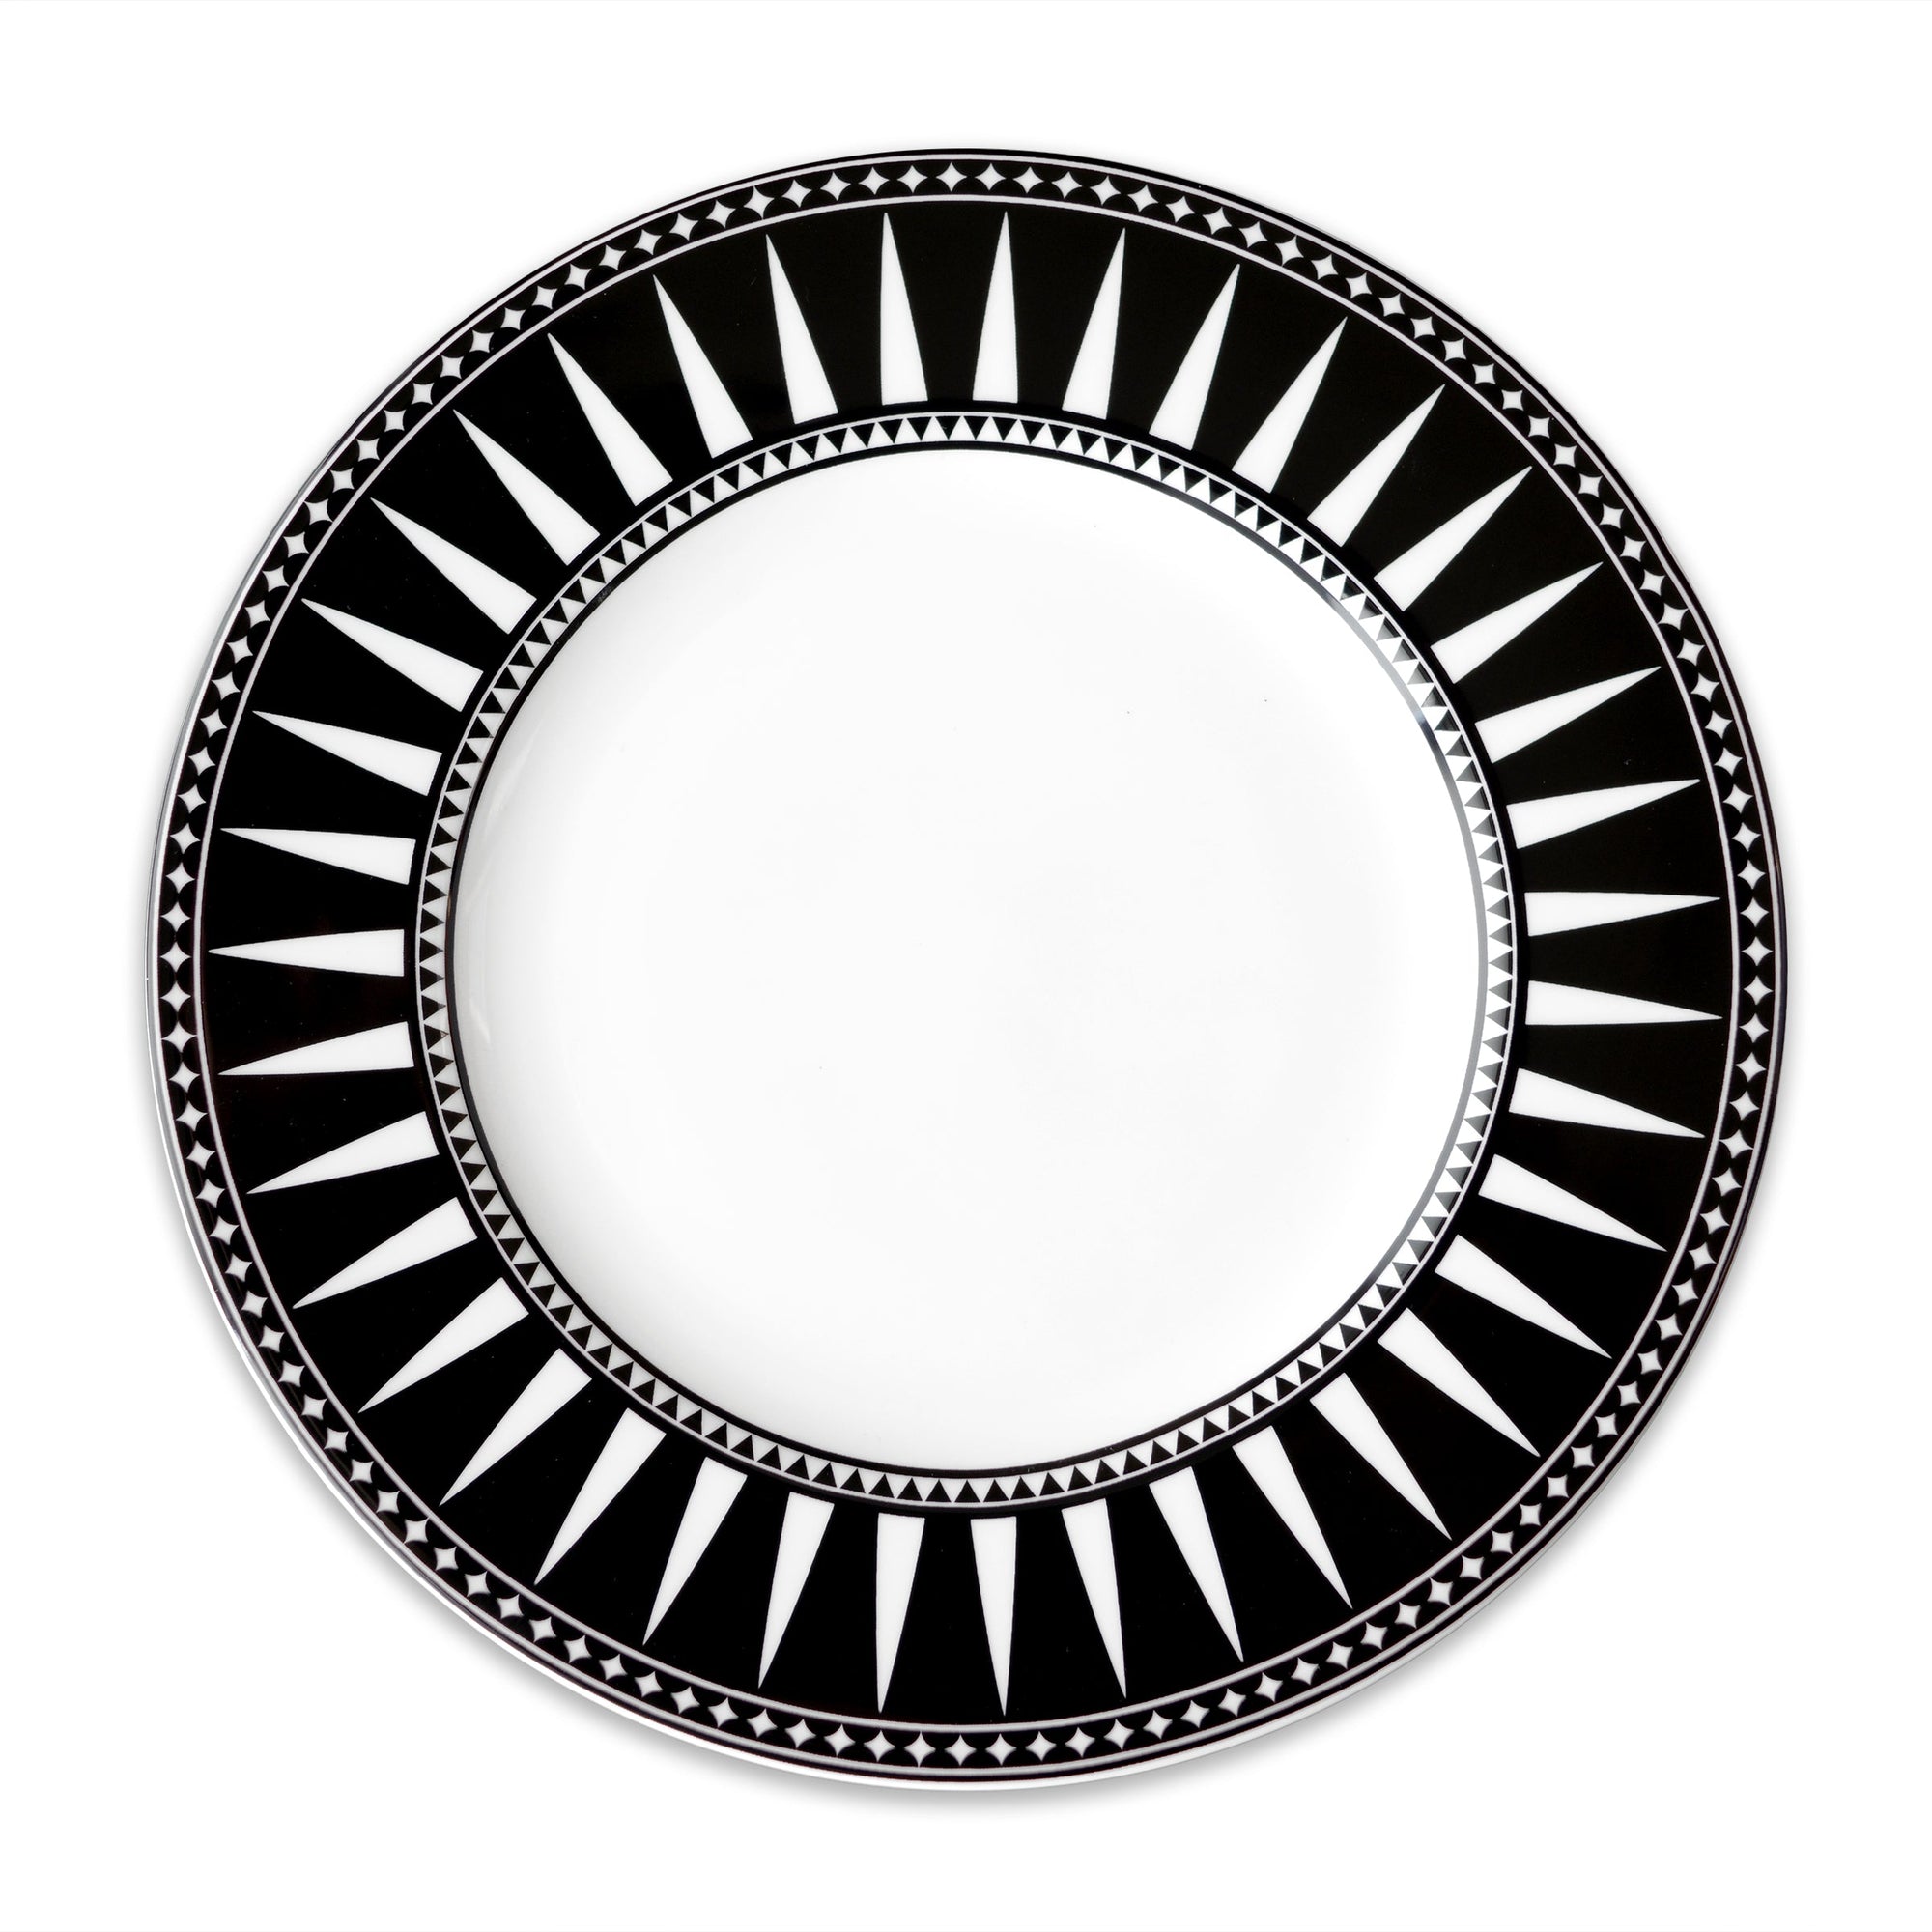 A round white plate with a black rim features a sophisticated geometric pattern of triangles and lines in white, reminiscent of the Marrakech Rimmed Dinner Plate by Caskata Artisanal Home.